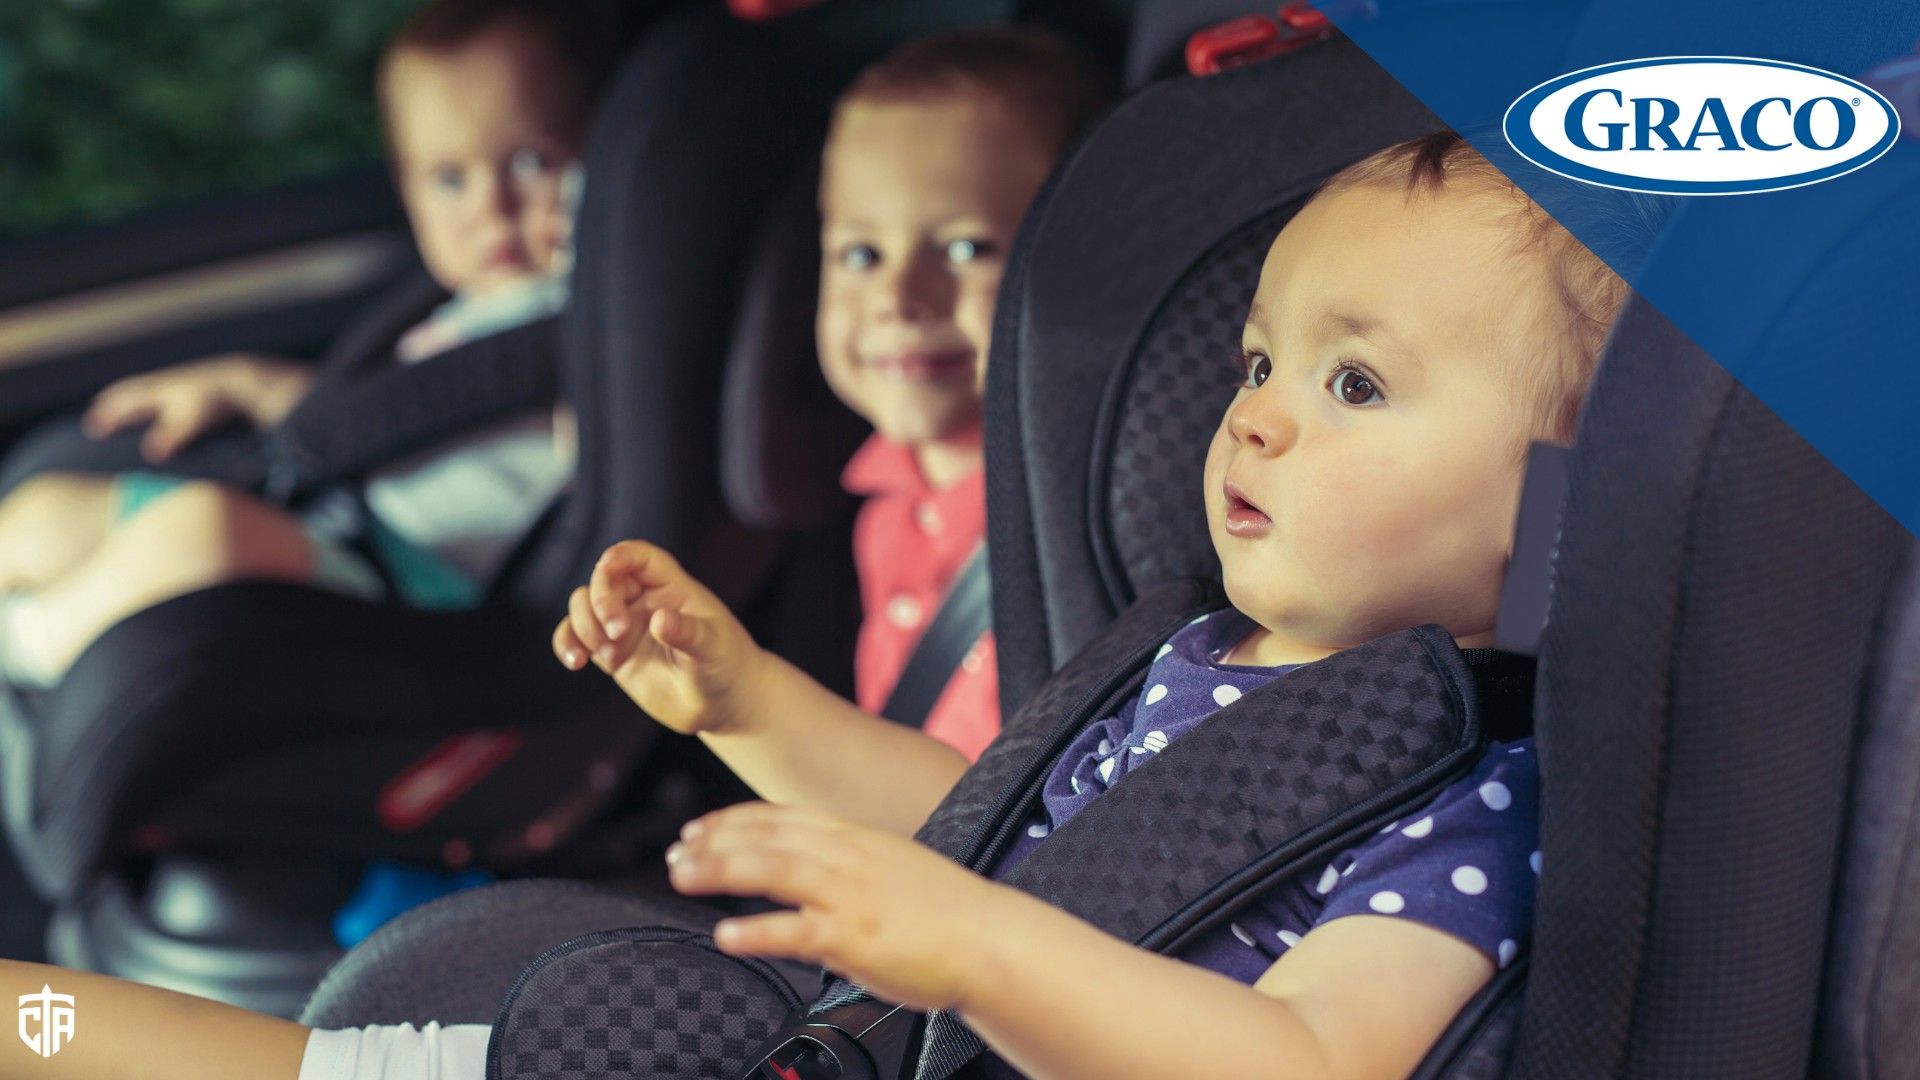 Graco Car Seats Sold Partially Expired Class Action Lawsuit Says Top Actions